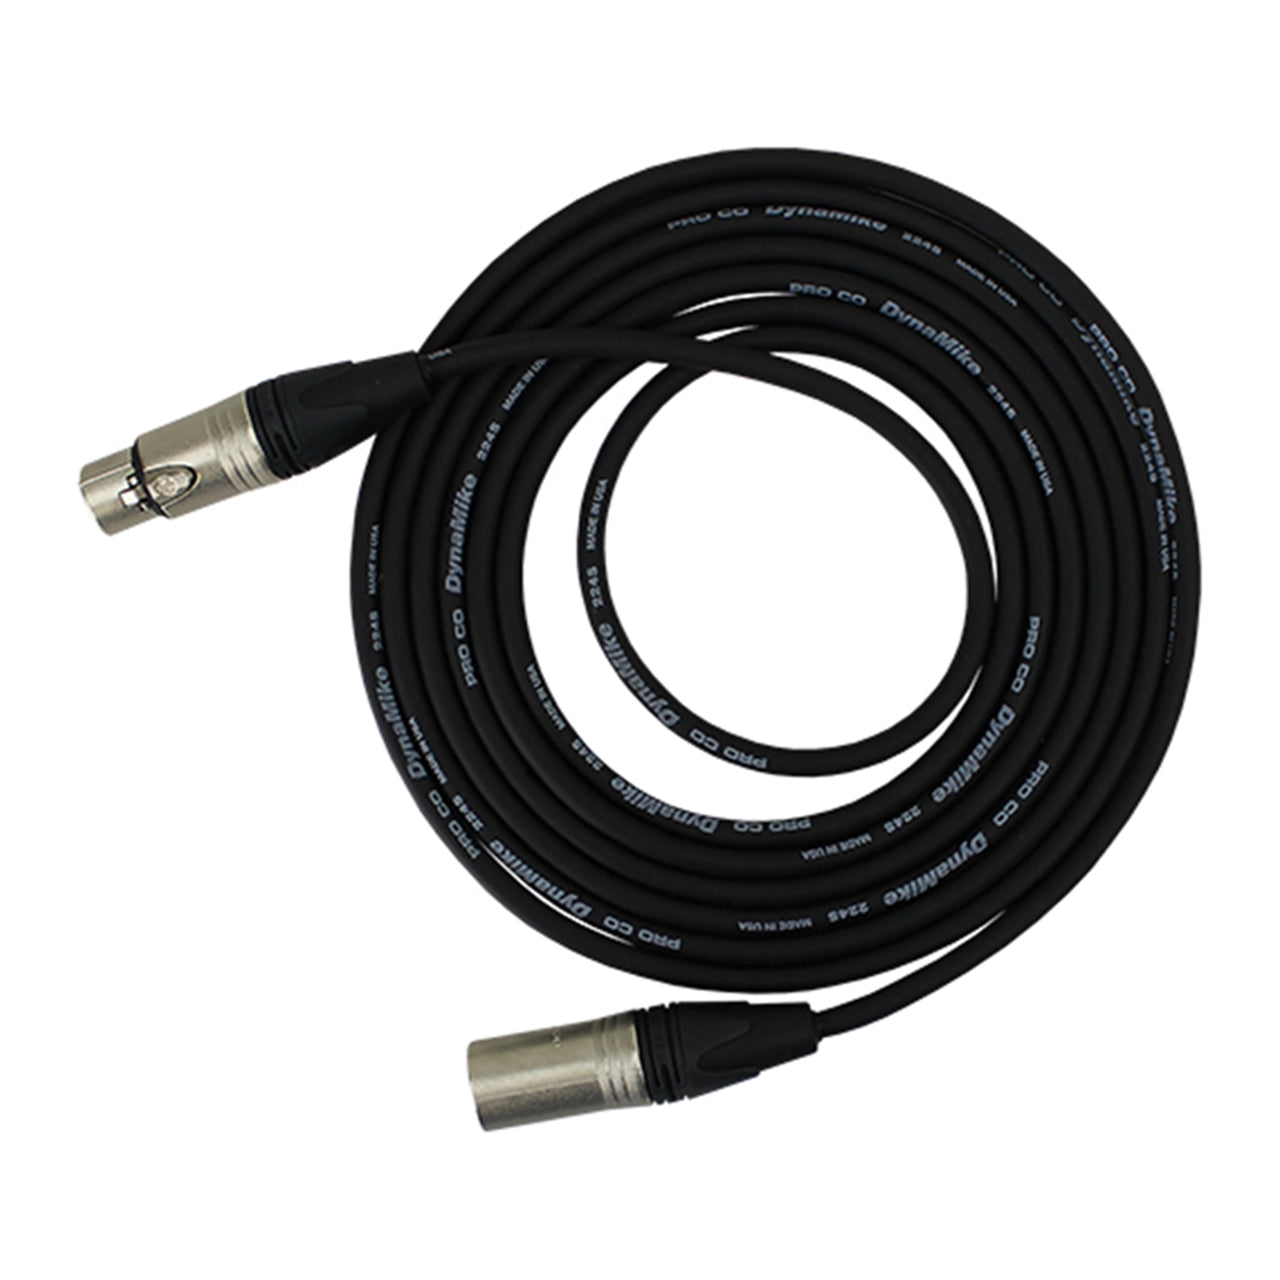 Pro Co Excellines Series Low-Z EMN-25 25' Microphone Cable